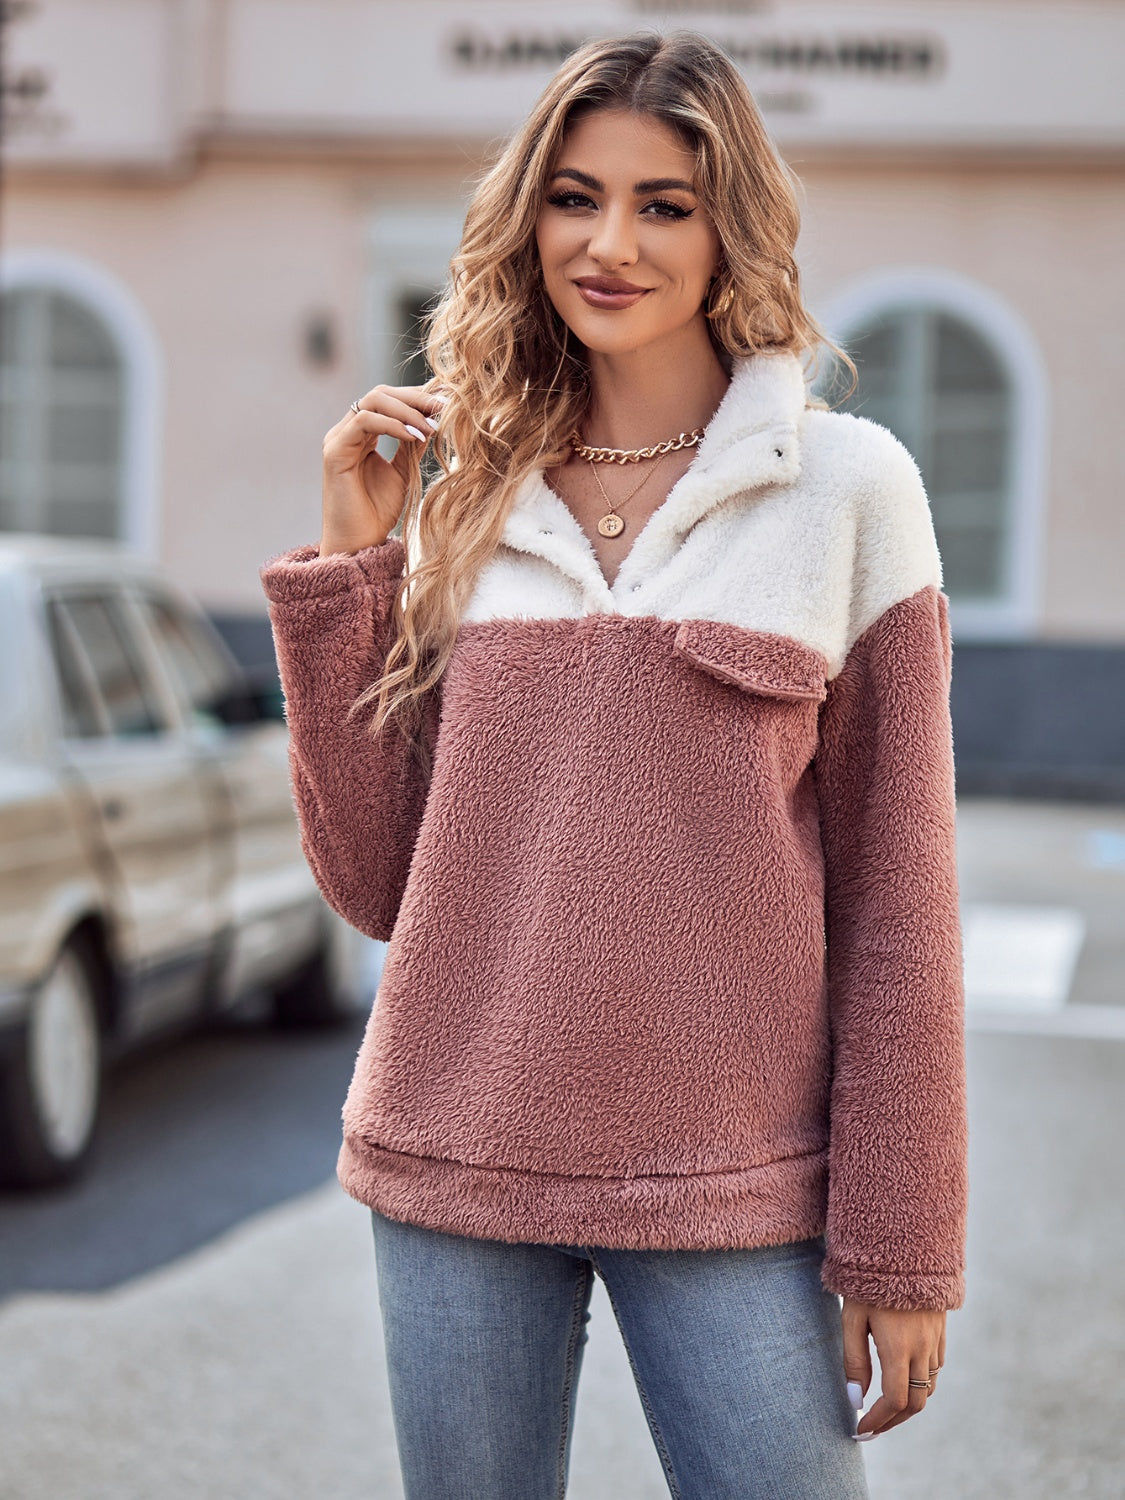 Two-Tone Dropped Shoulder Teddy Sweatshirt - Kawaii Stop - Basic Style, Casual Chic, Cozy Comfort, Easy Care, Everyday Fashion, Fall Wardrobe, Hoodies, Opaque Material, Relaxed Fit, S.N, Ship From Overseas, Simple Elegance, Softness and Warmth, Sweatshirts, Teddy Sweatshirt, Two-Tone Design, Women's Apparel, Women's Clothing